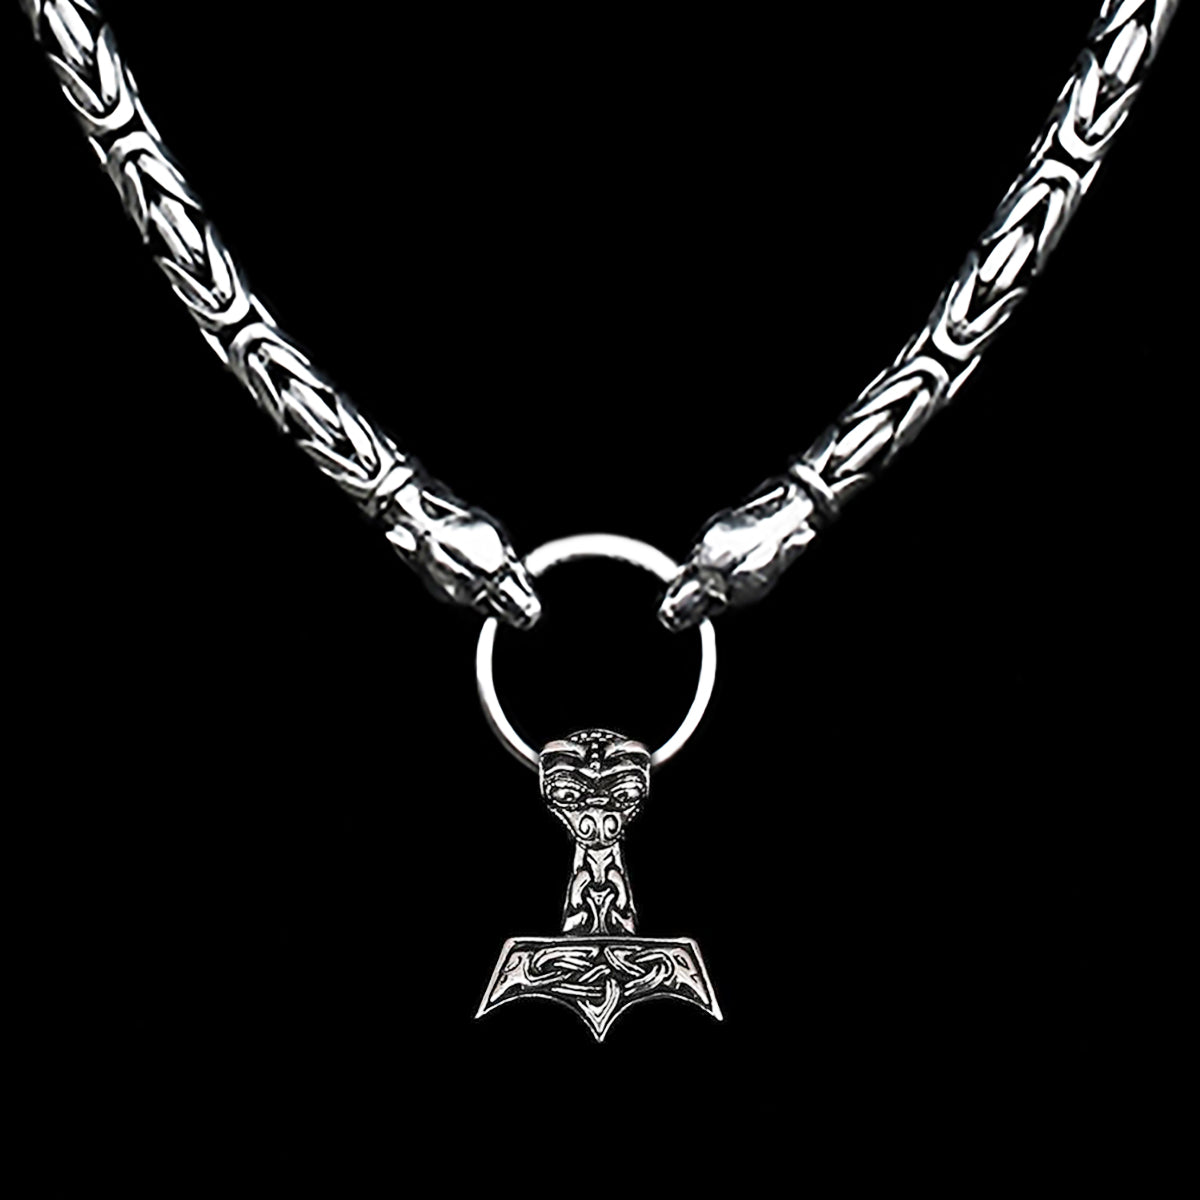 8mm Thick Silver Thor's Hammer Necklace with Ferocious Wolf Heads - Split Ring - AD2 Ferocious Thors Hammer